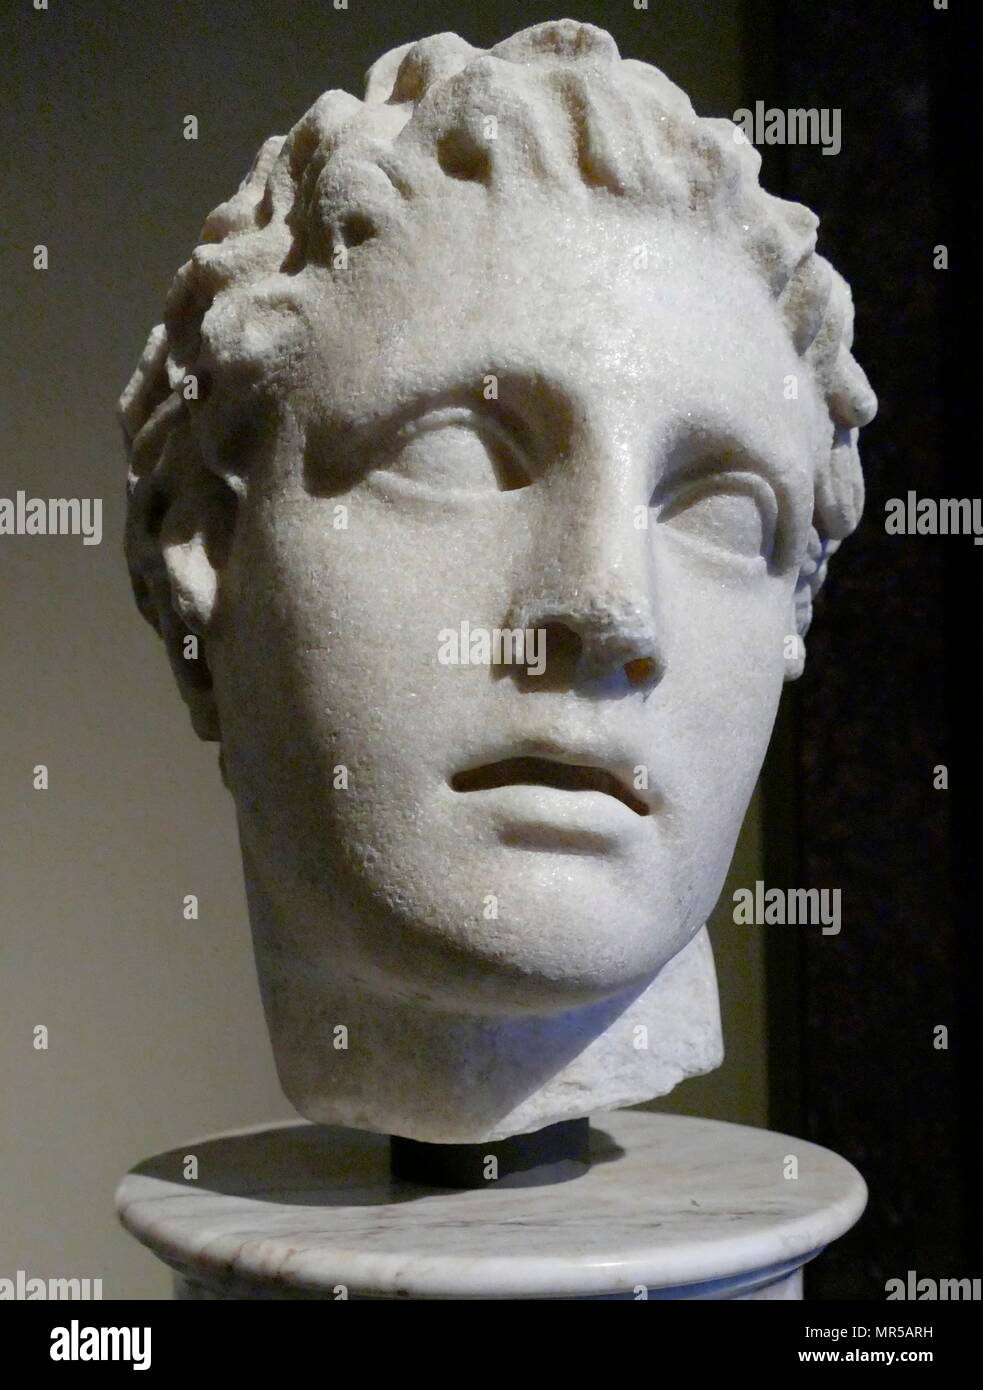 Copy of a 2nd century BC head of the Greek God Ares, God of War. Dated 2nd Century BC Stock Photo